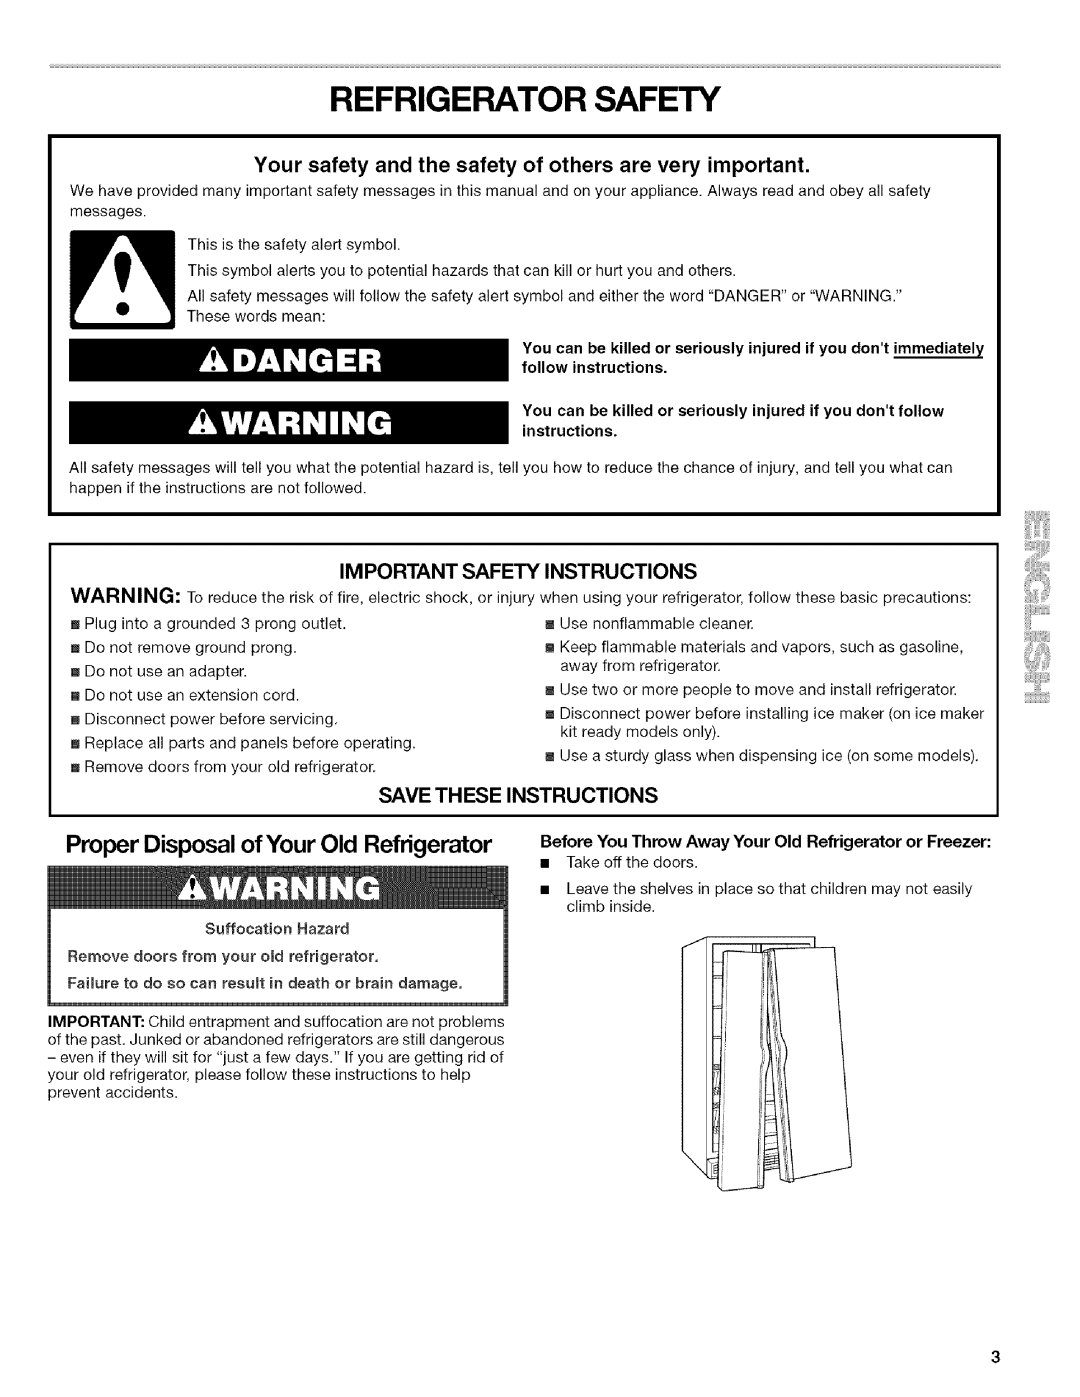 Kenmore 10656863601 manual Refrigerator Safety, Proper Disposal of Your Old Refrigerator, Important Safety, Instructions 